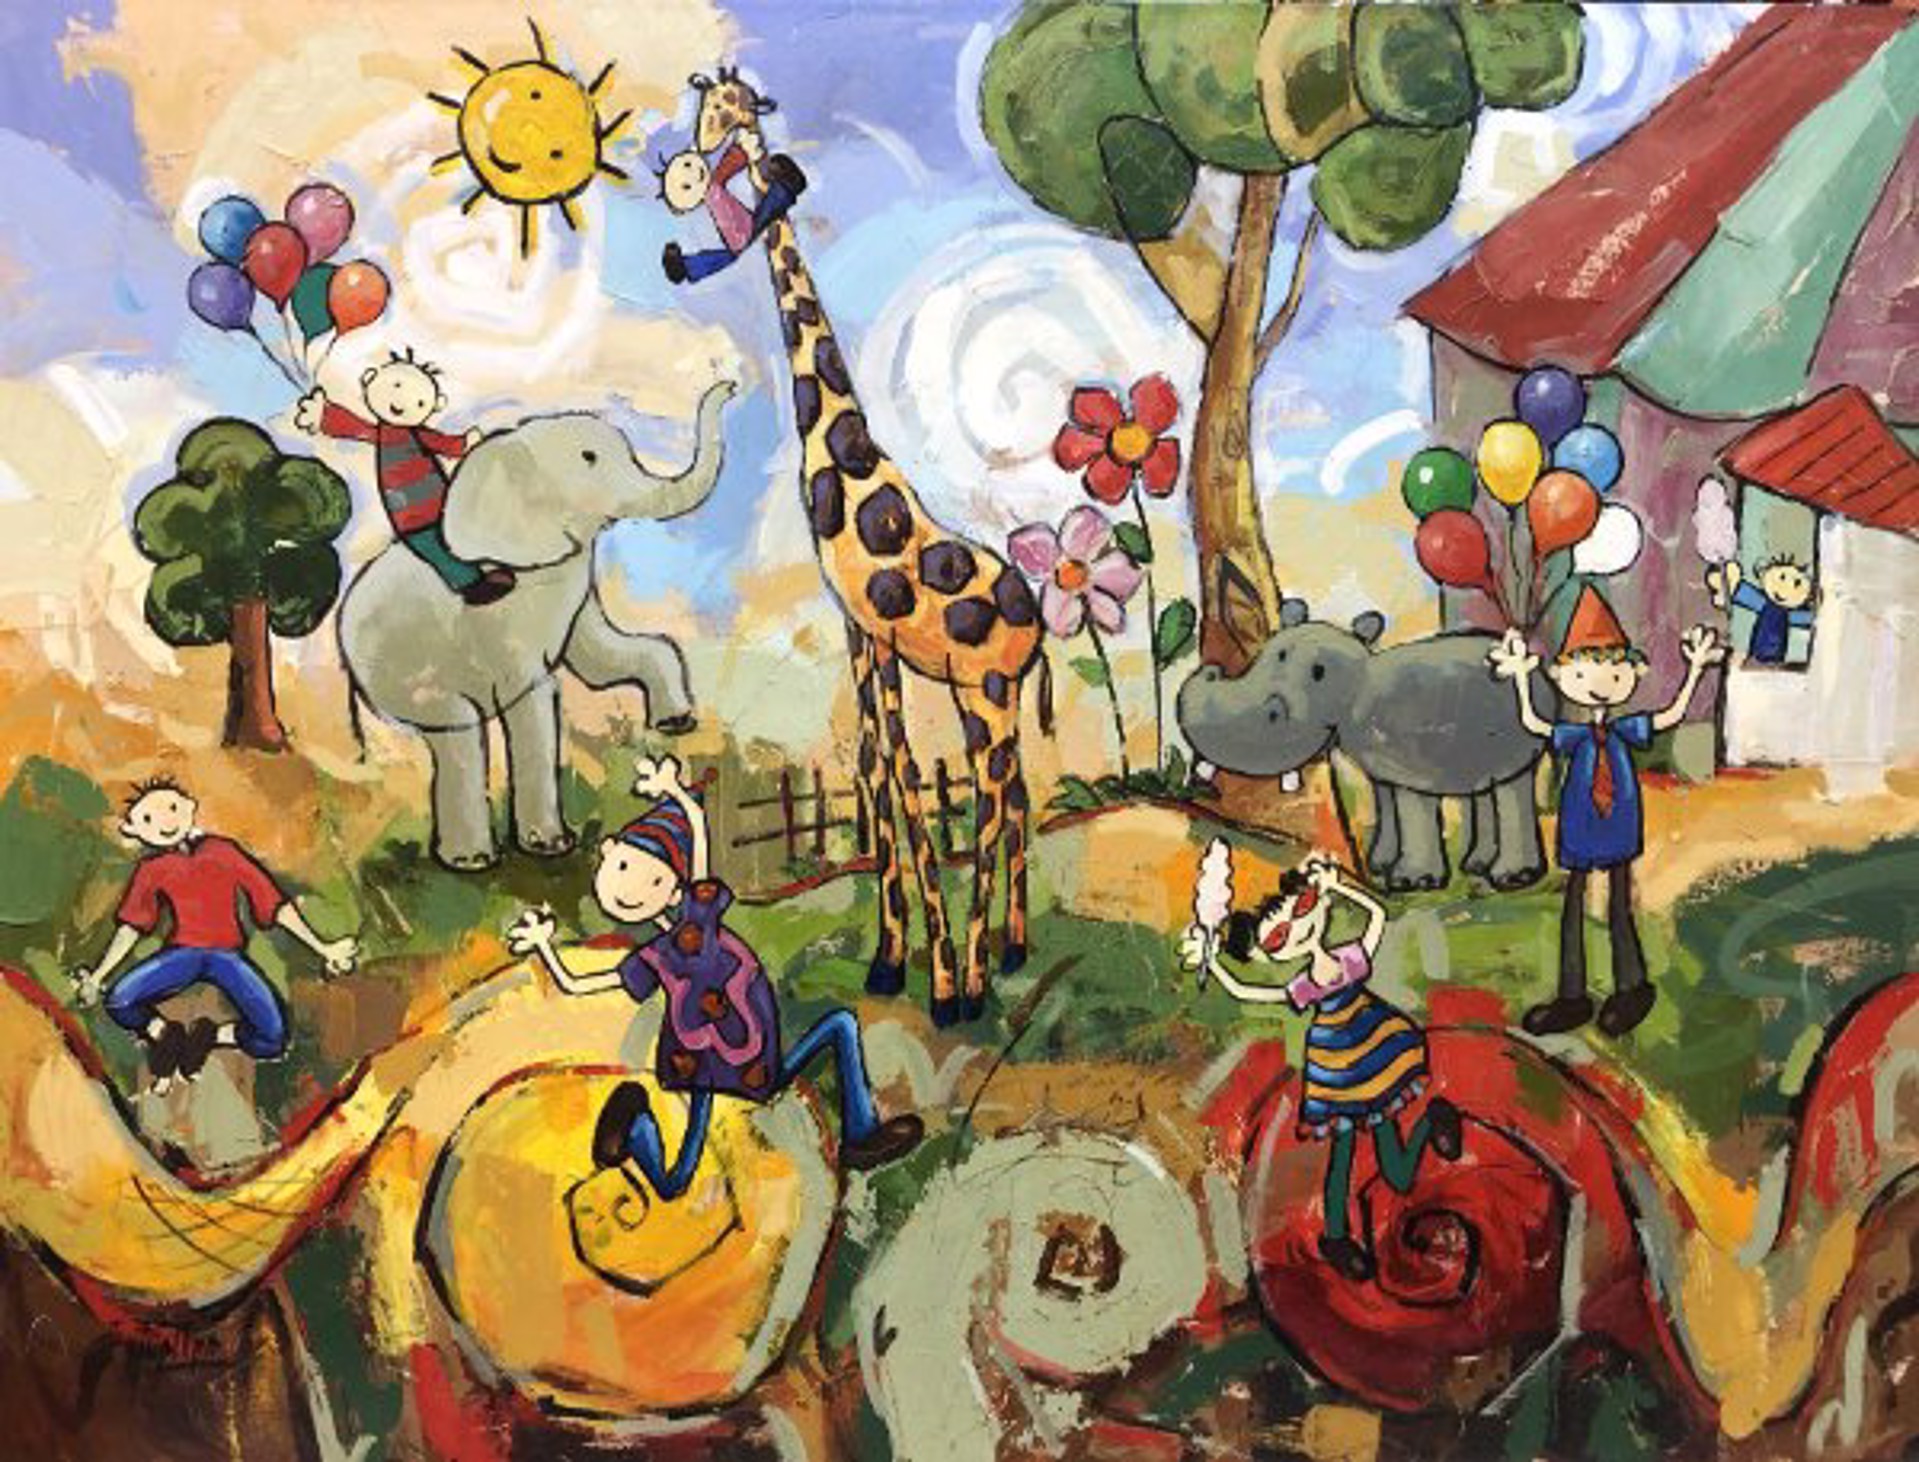 The Day The Circus Came to Town by Jose Huallpa